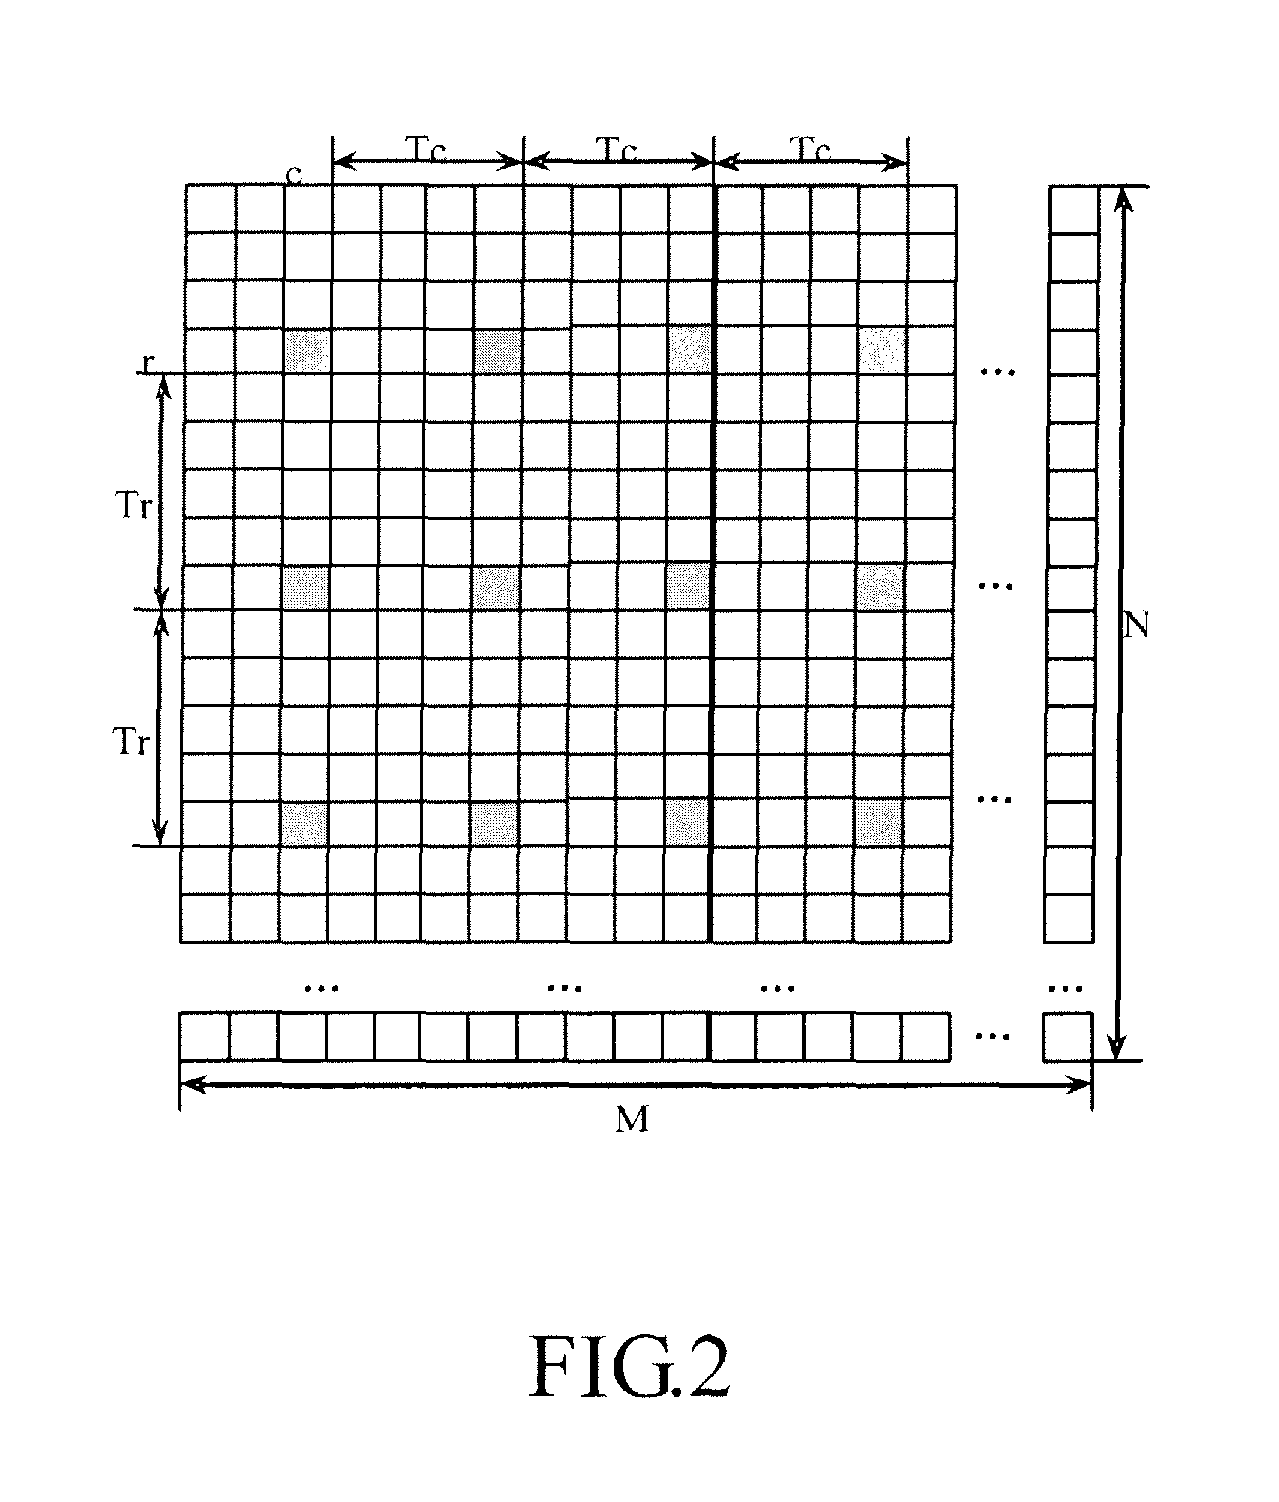 Method and device for video predictive encoding